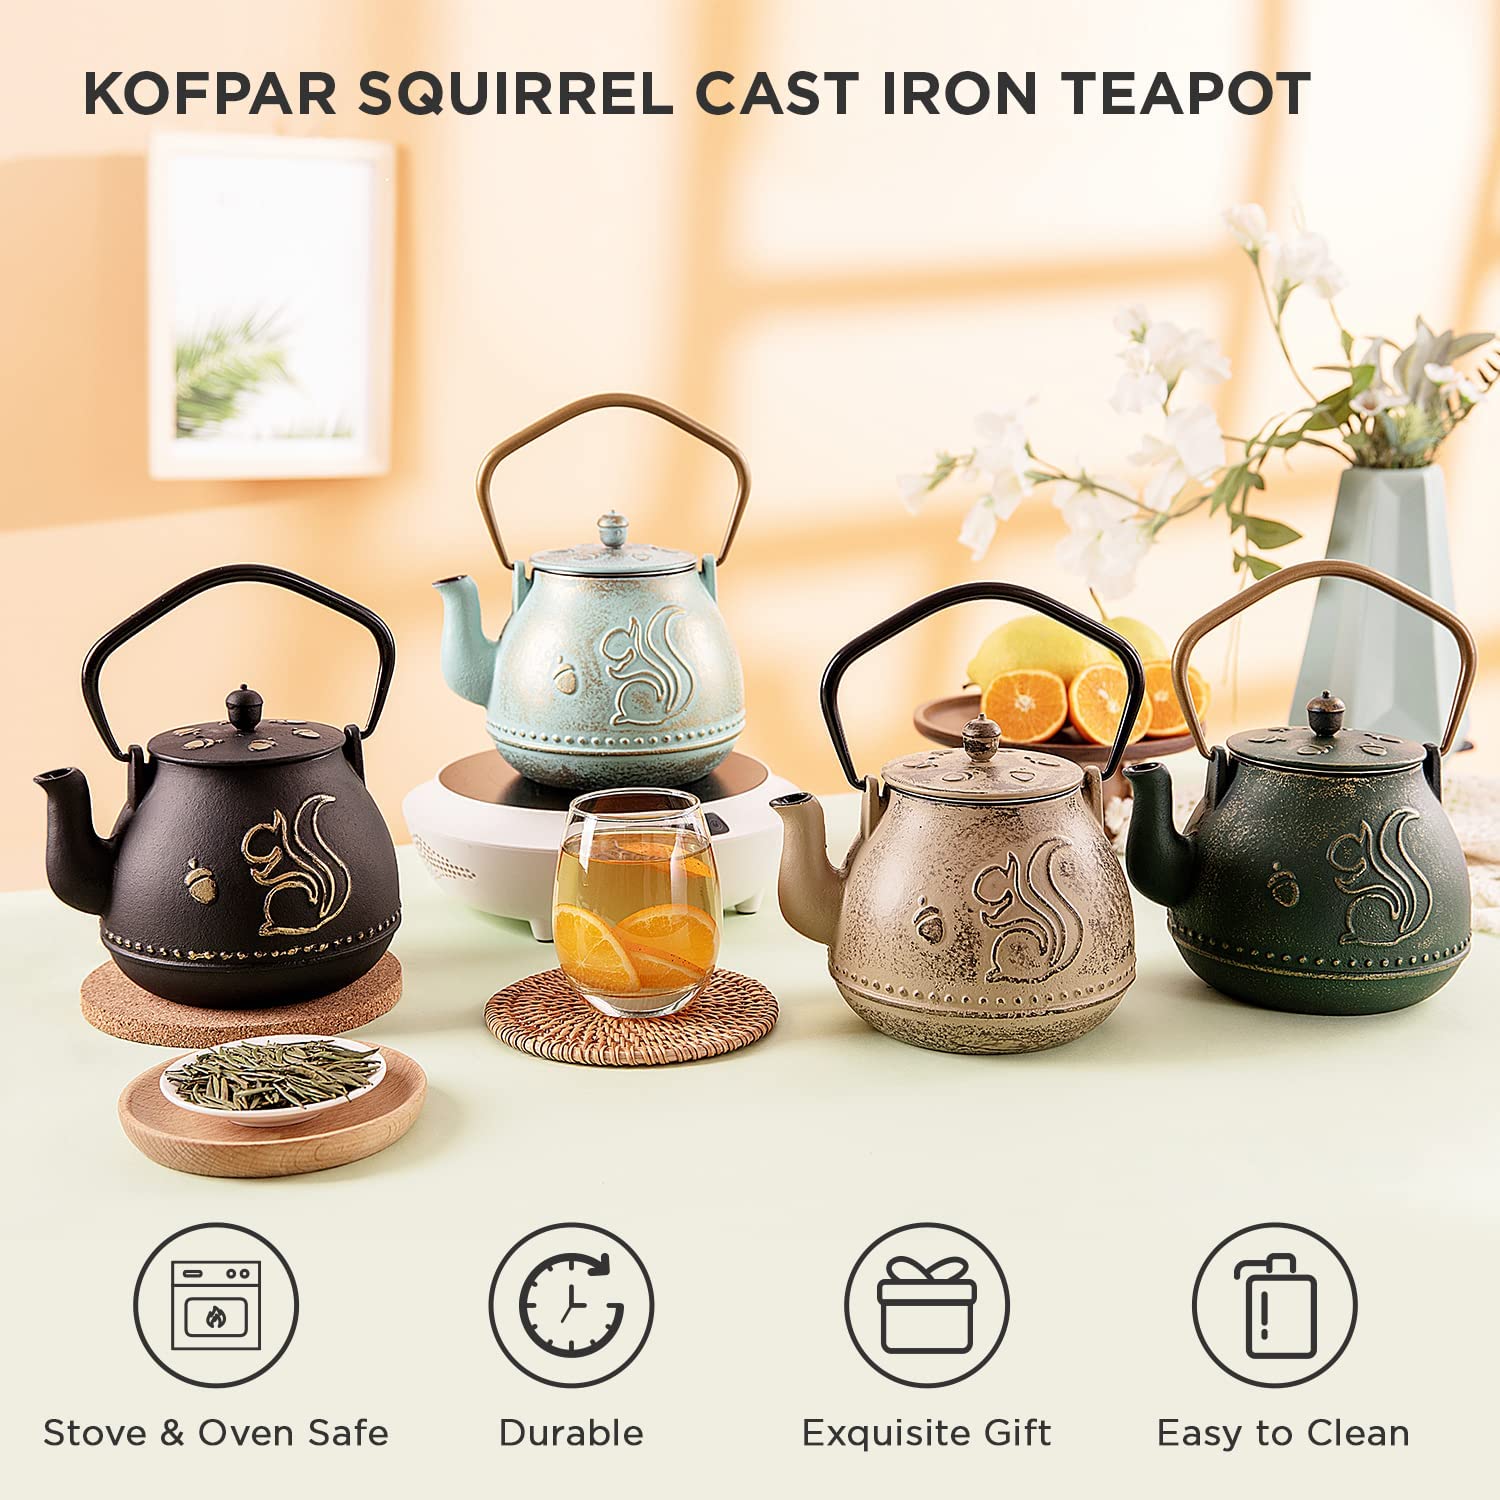 TOPTIER Tea Kettle for Stove Top, Cast Iron Teapot Stovetop  Safe with Infusers for Loose Tea, 22 oz, Light Green: Teapots